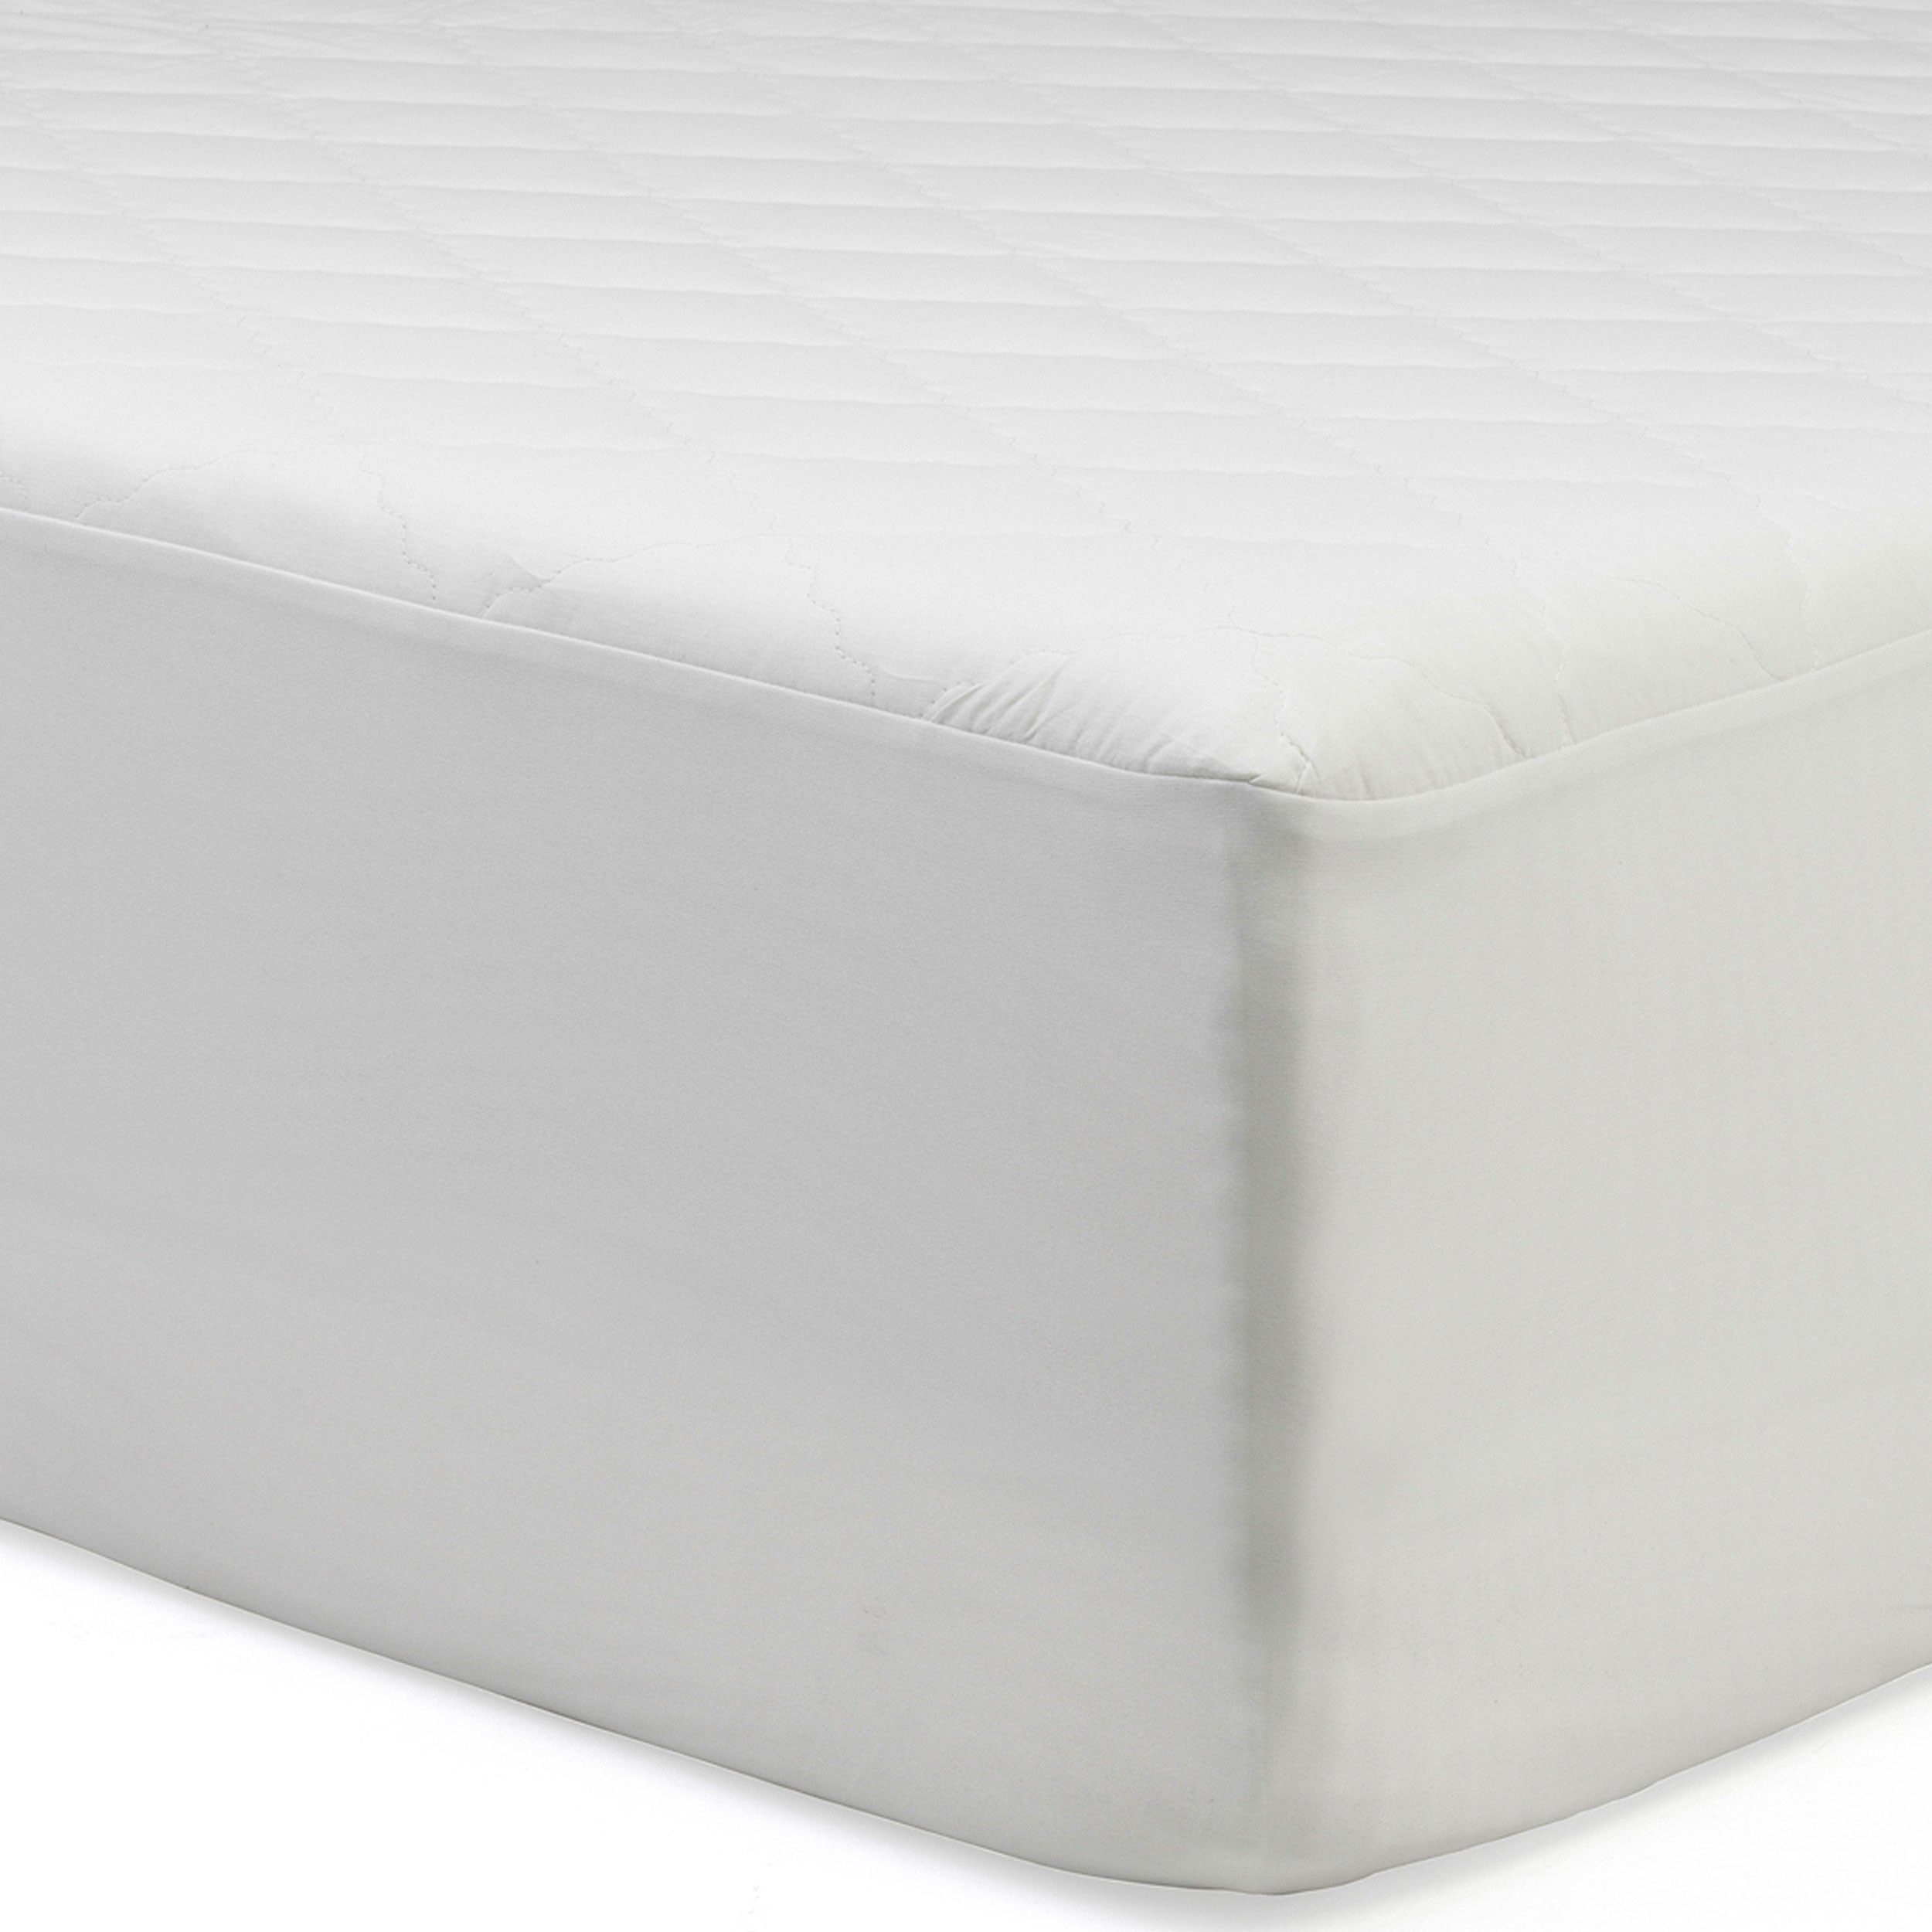 Fitted Quilted 100% Cotton Mattress Protector - 100% Waterproof and Hypoallergenic - BlissfulNights.com